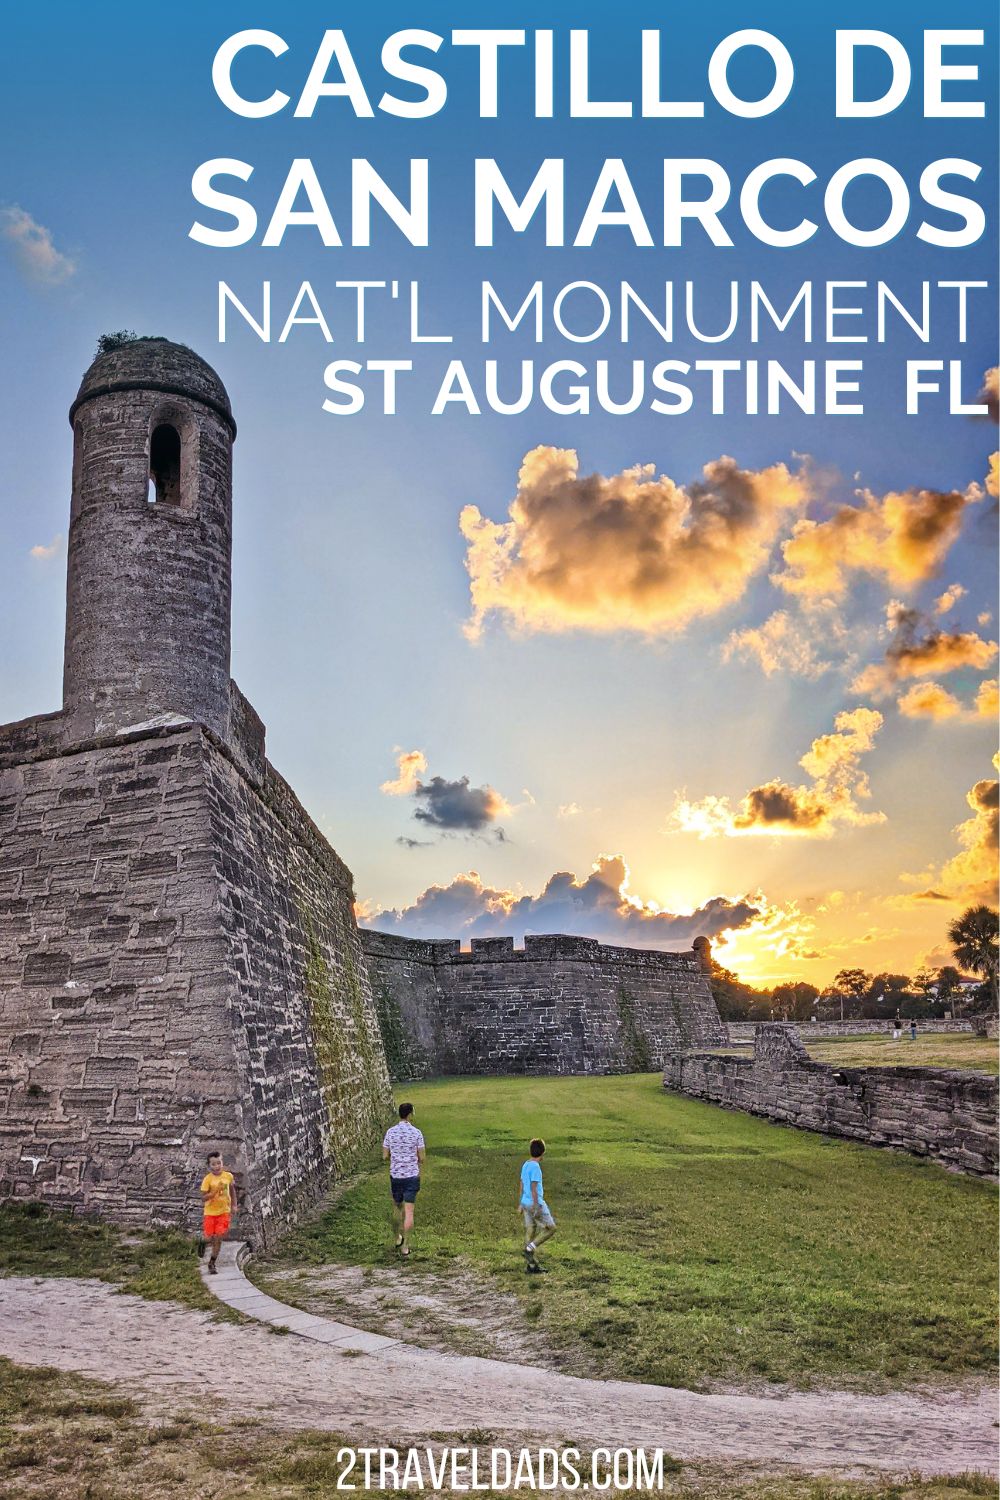 Castillo de San Marcos National Monument is the perfect blend of fun, history, beauty and a must-visit on your Florida trip. See why this Spanish fort is one of the best things to do in St Augustine, the nation's oldest city.